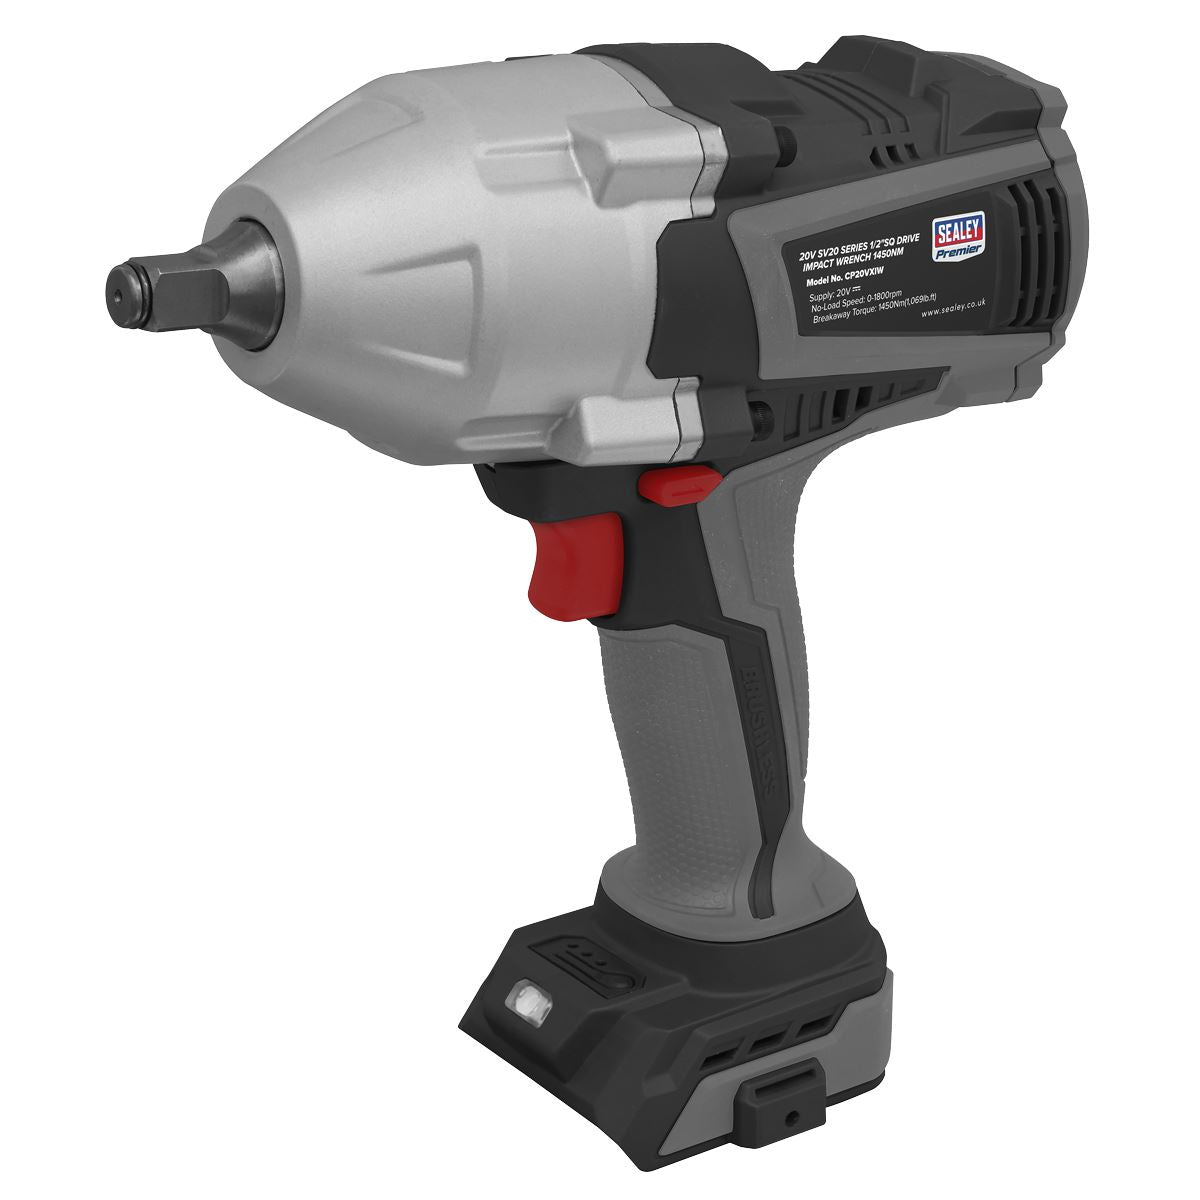 Sealey Premier Brushless Impact Wrench 20V SV20 Series 1/2"Sq Drive - Body Only